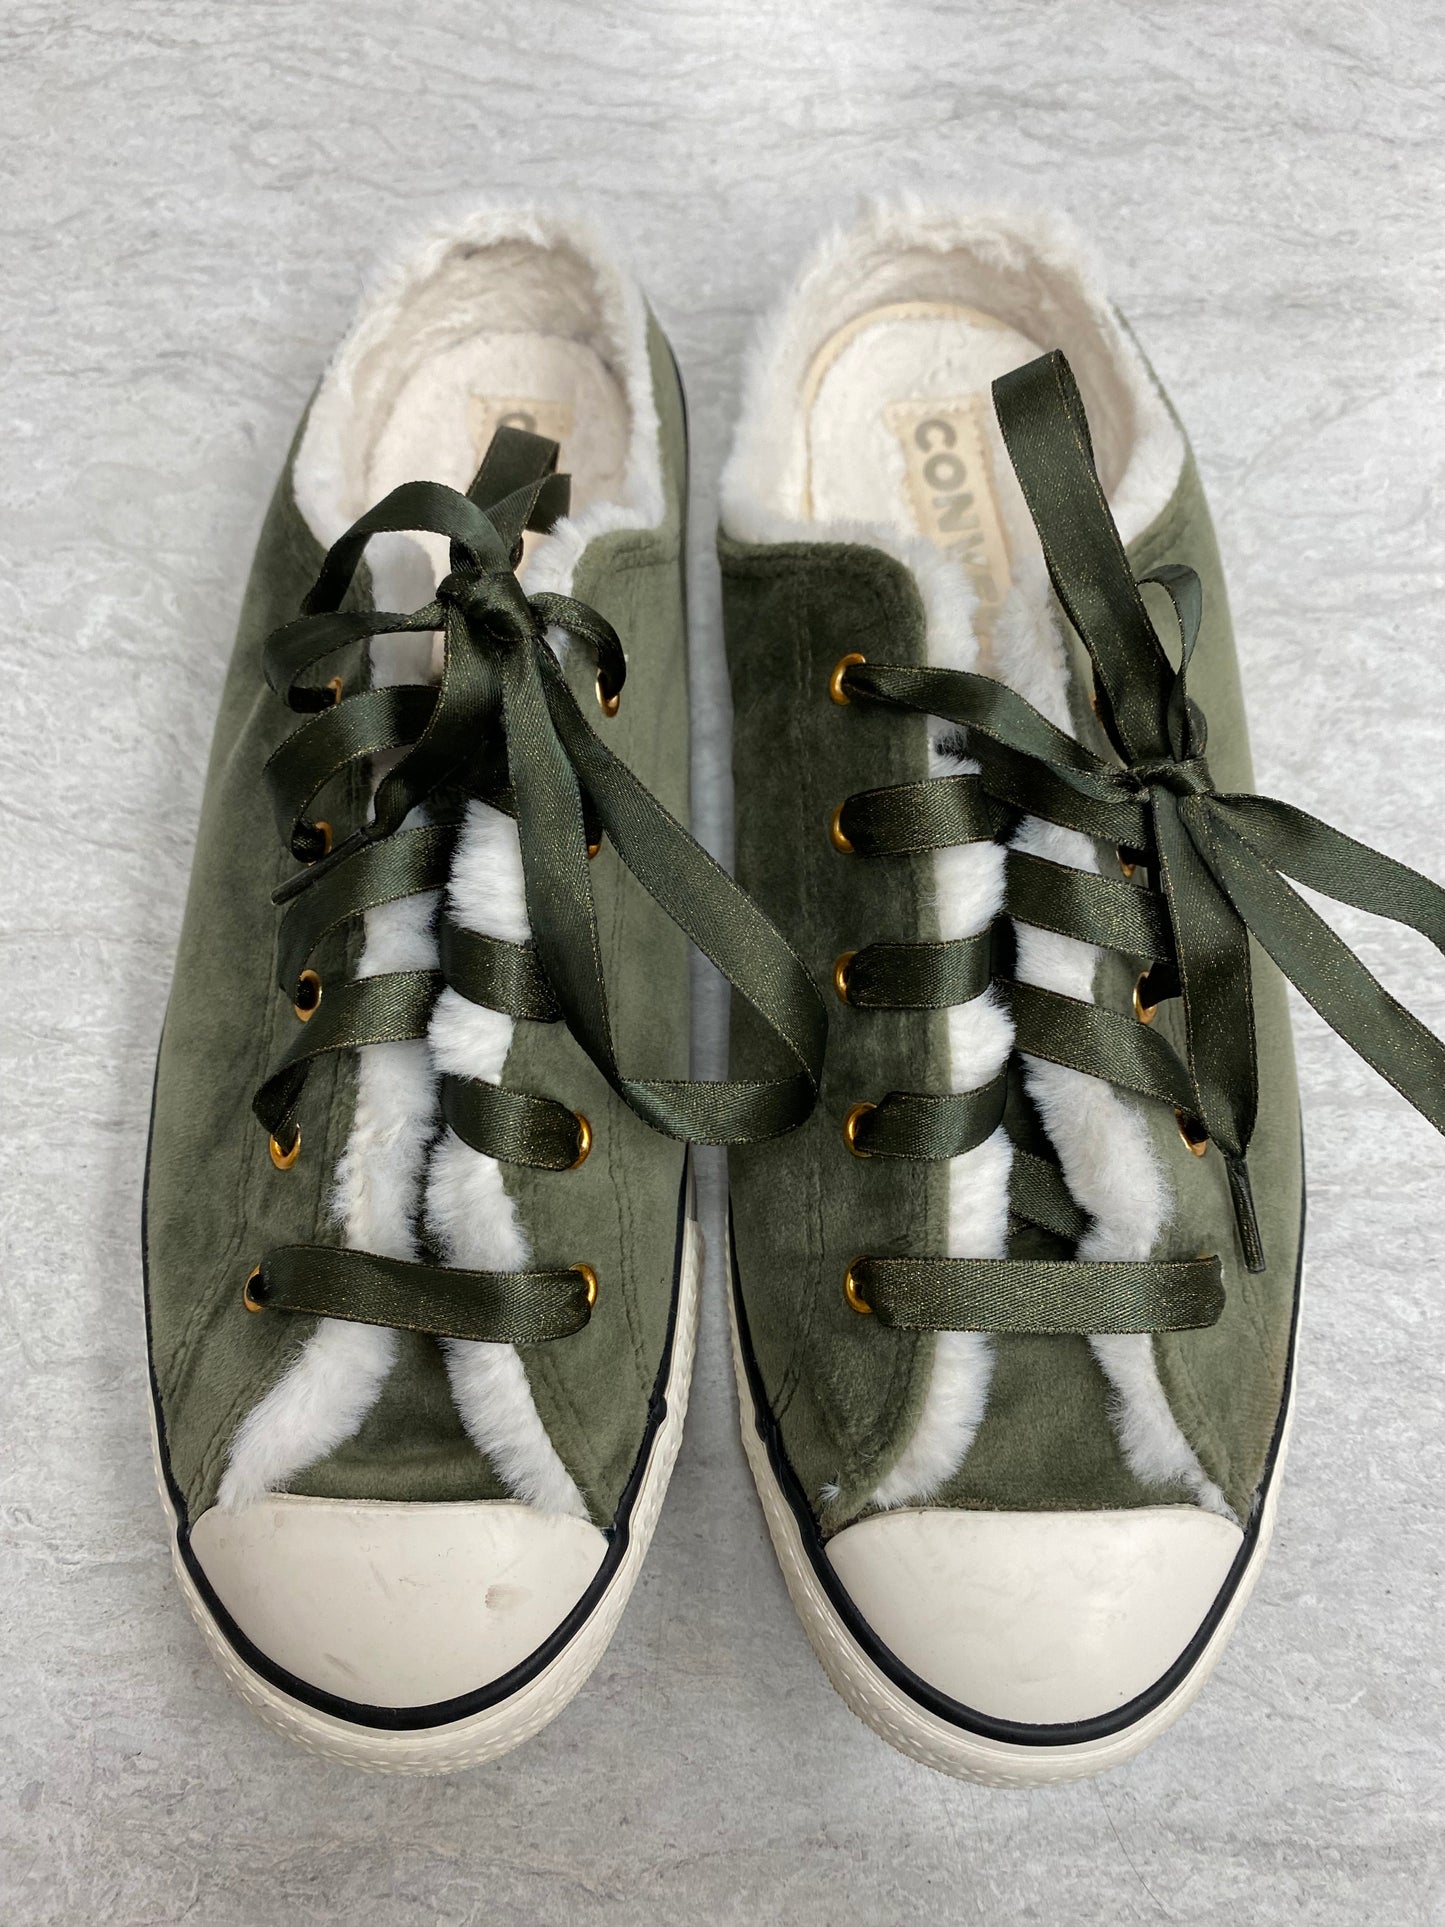 Green Shoes Sneakers Converse, Size 8.5